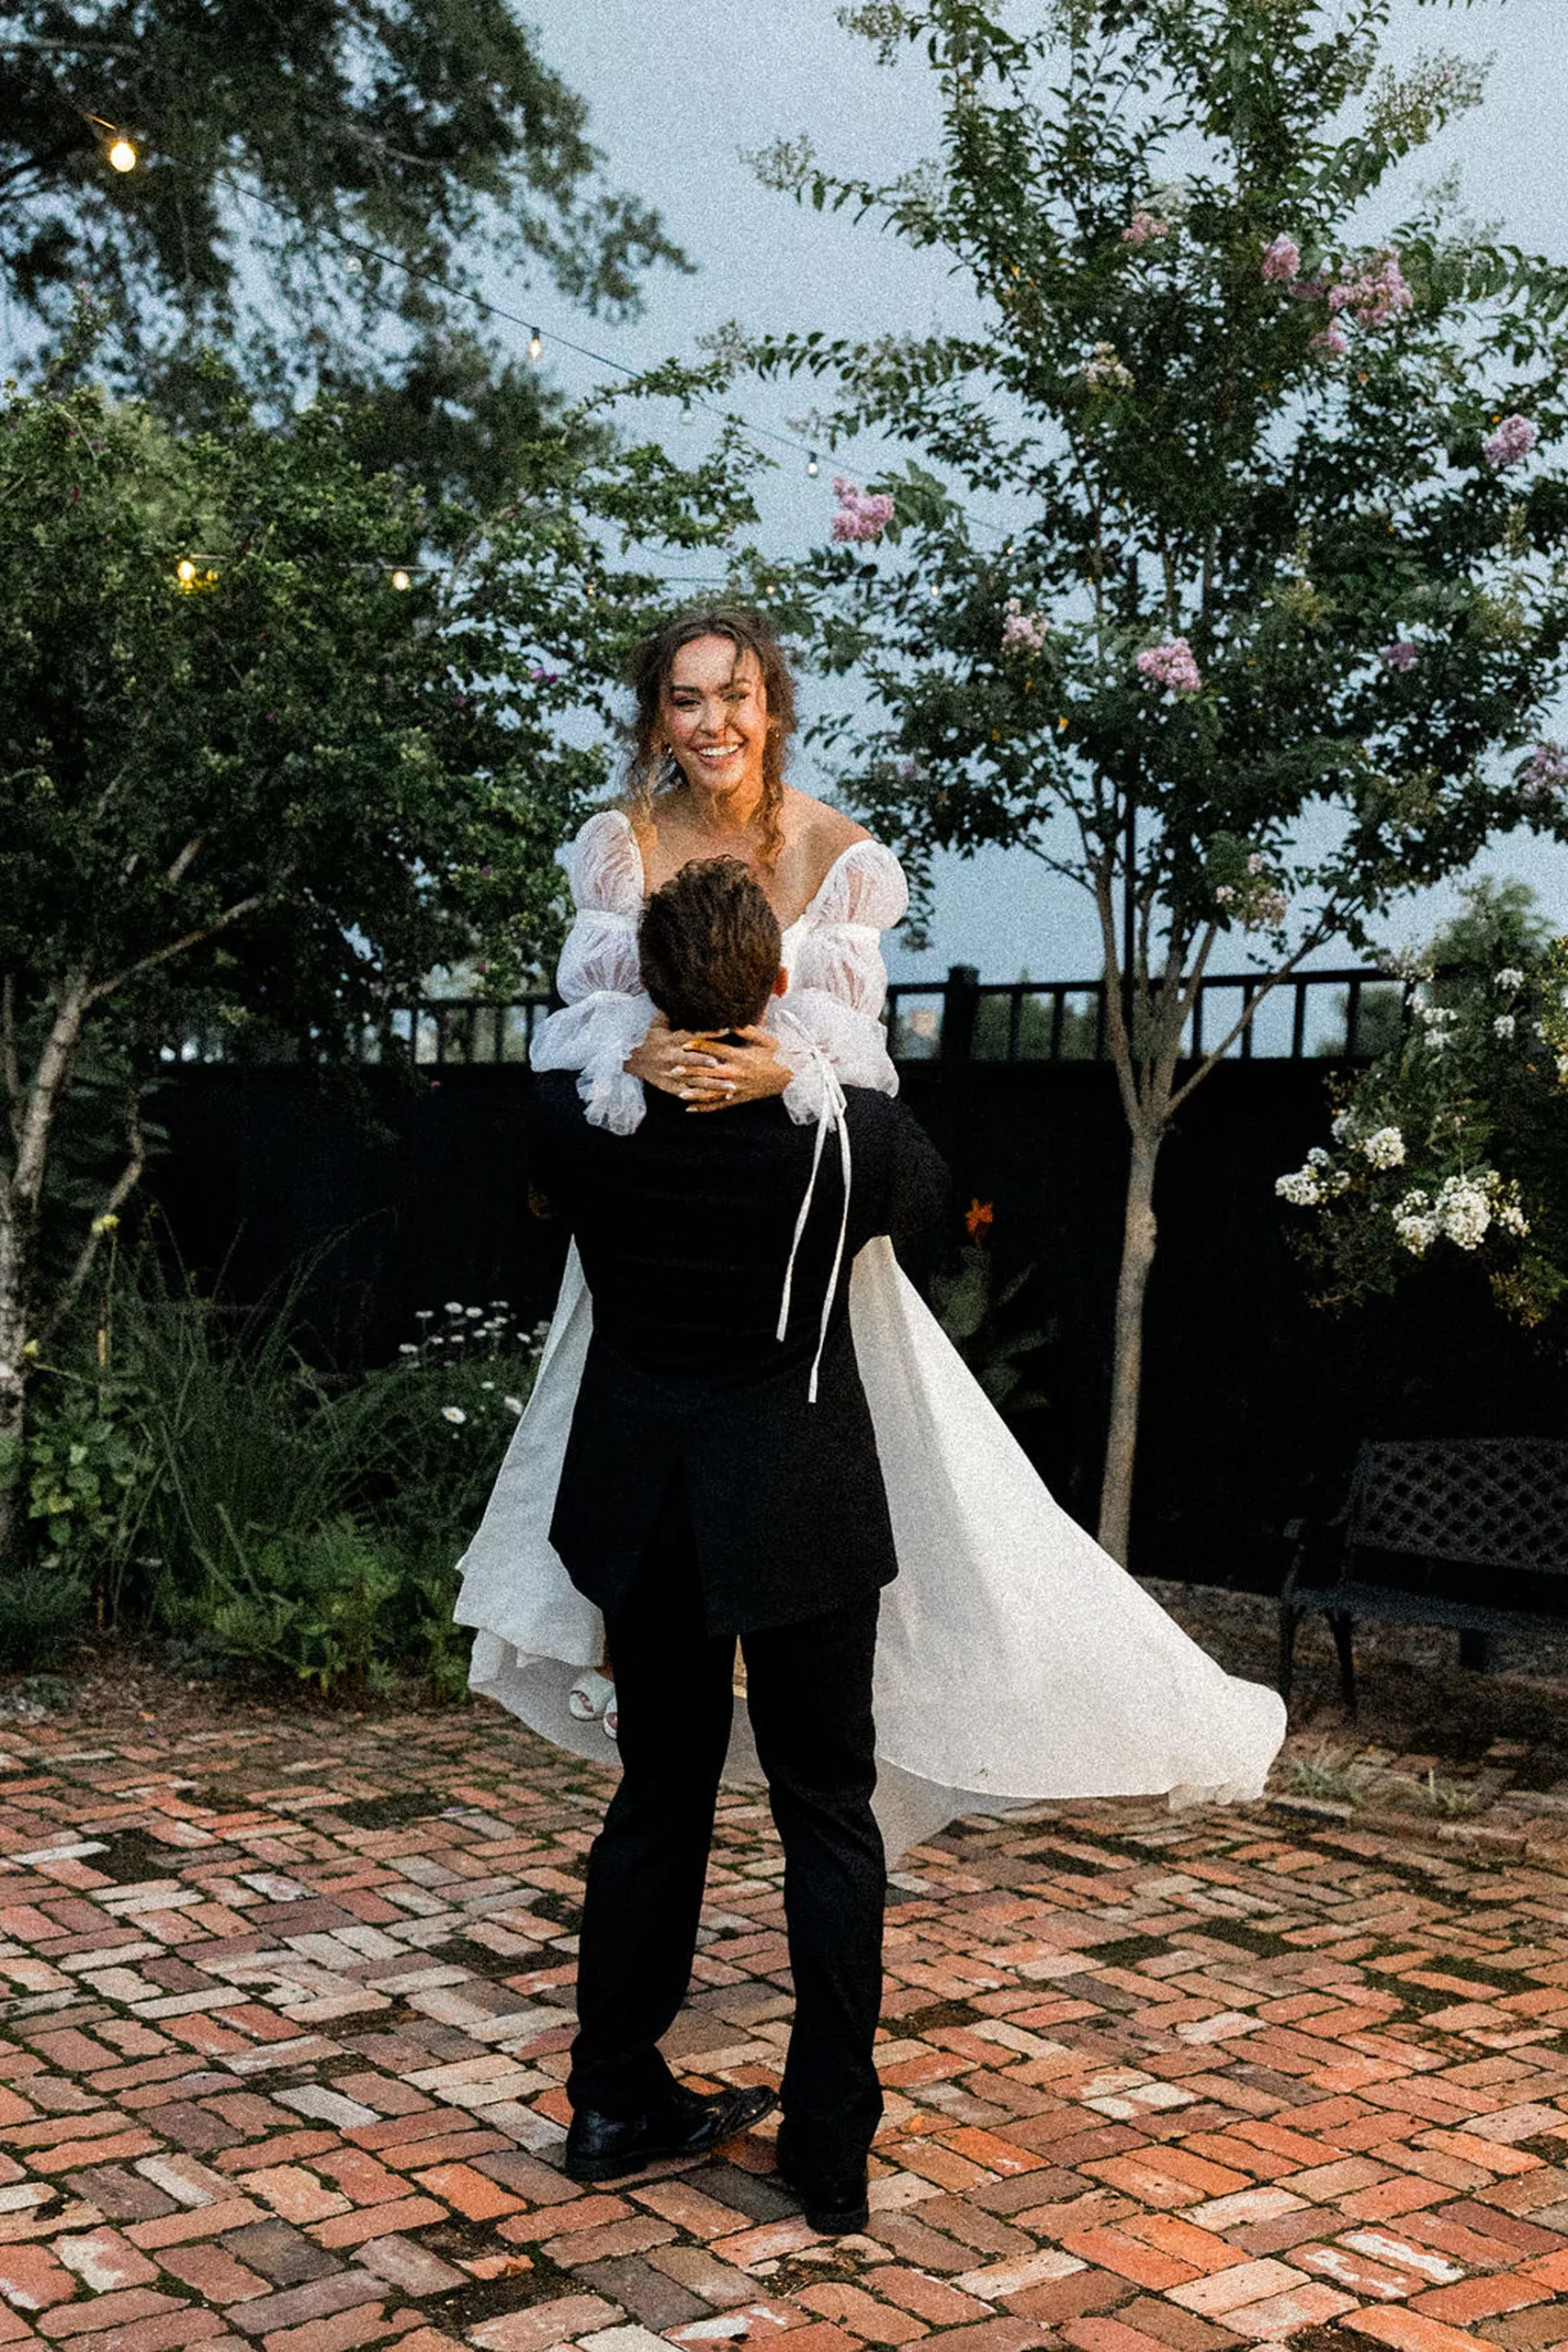 A groom in a black suit dances and lifts his bride while they dance on the brick patio outside the lillian gardens wedding venue